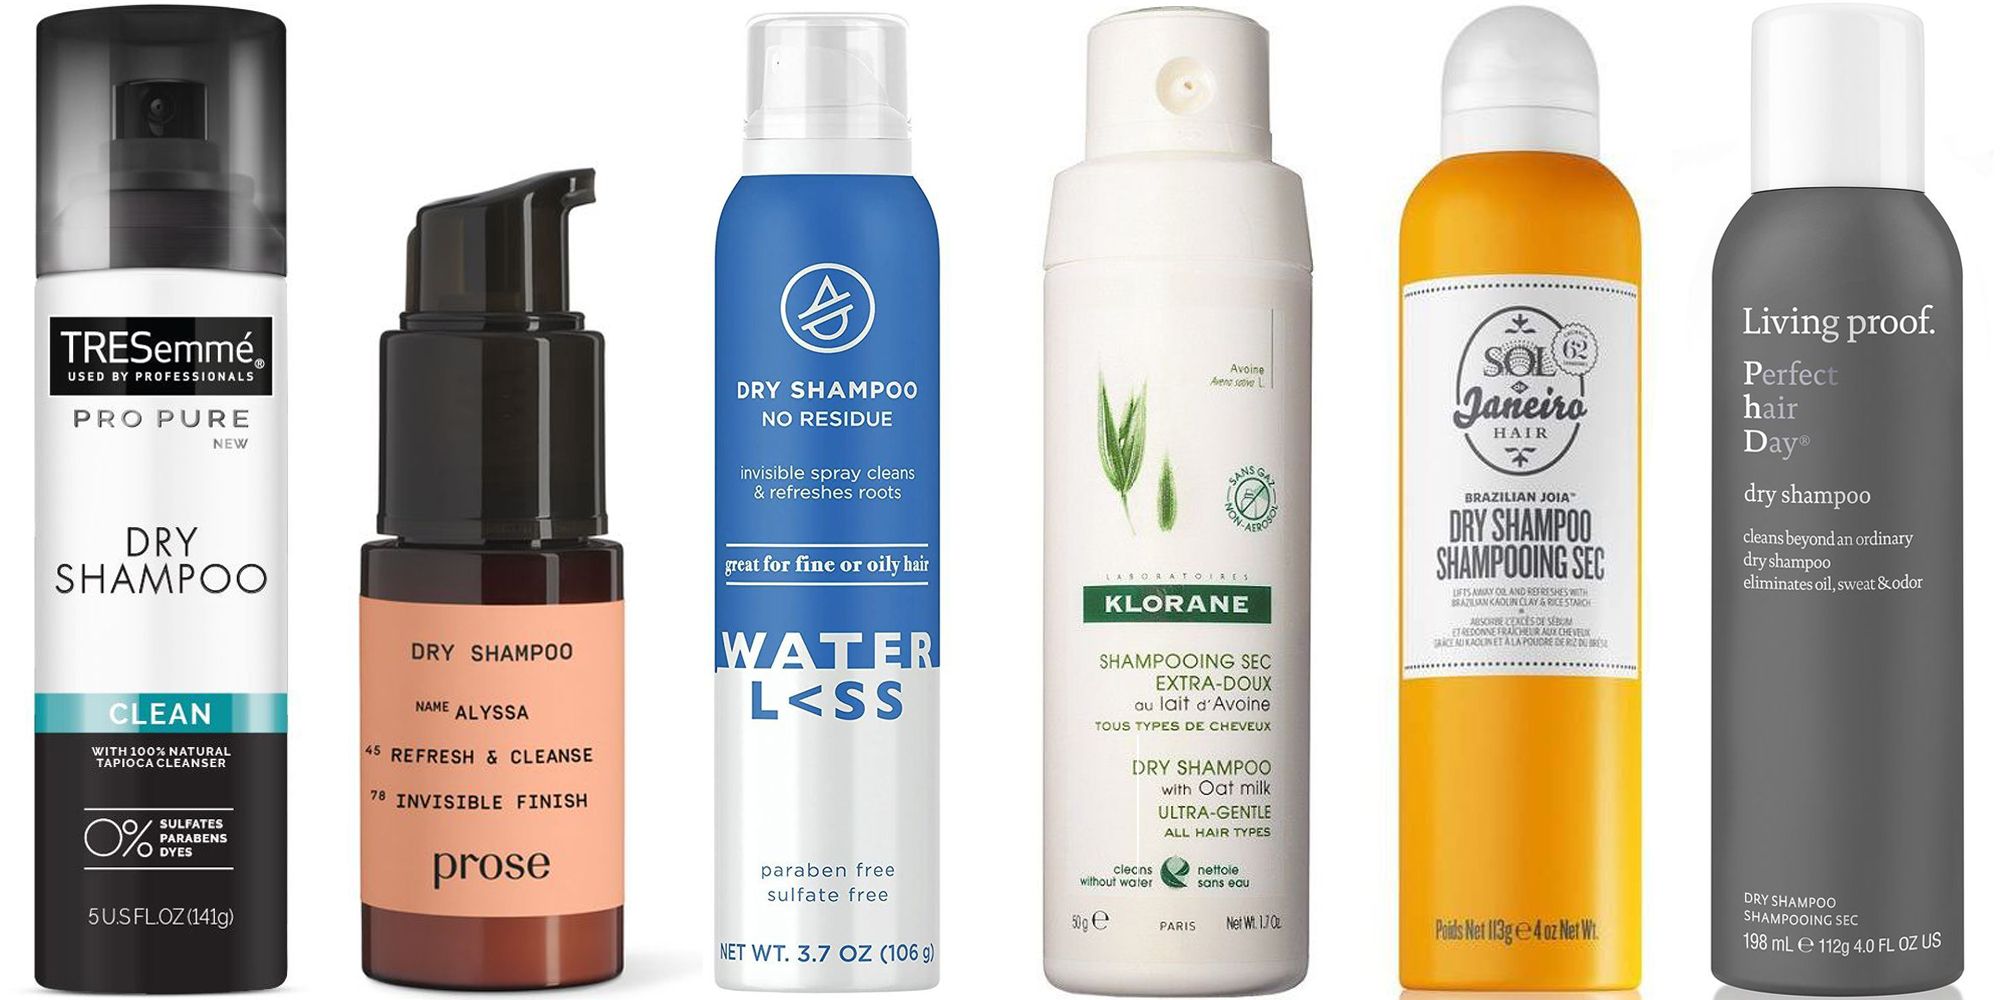 19 Best Dry Shampoo Picks - Top Shampoo for Dry and Hair